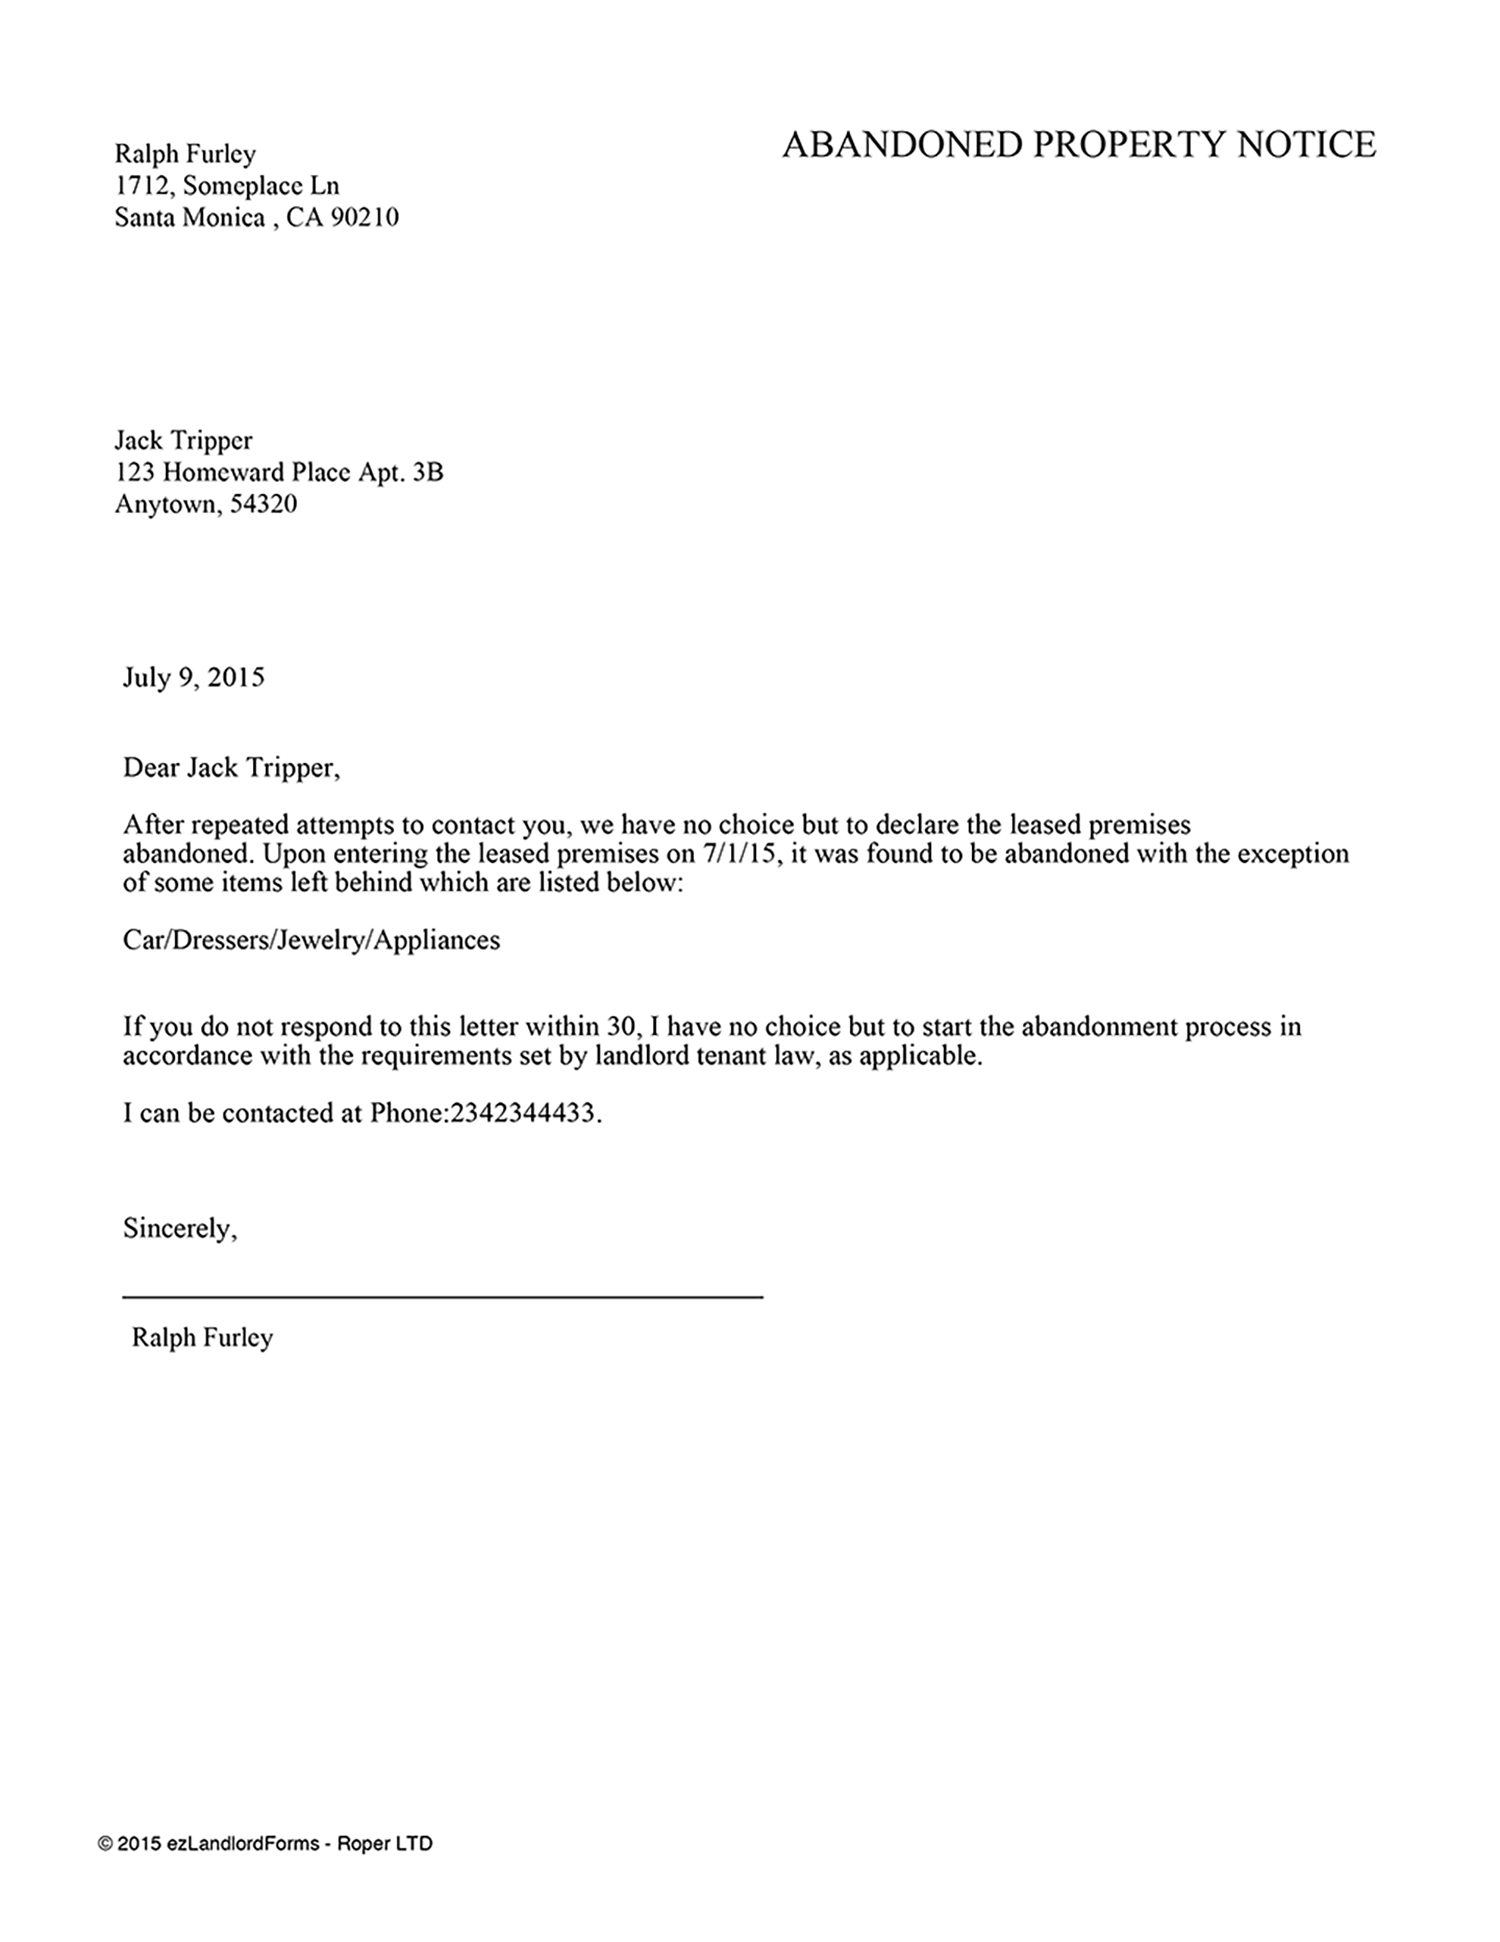 Proof Of Residency Letter From Landlord from www.ezlandlordforms.com